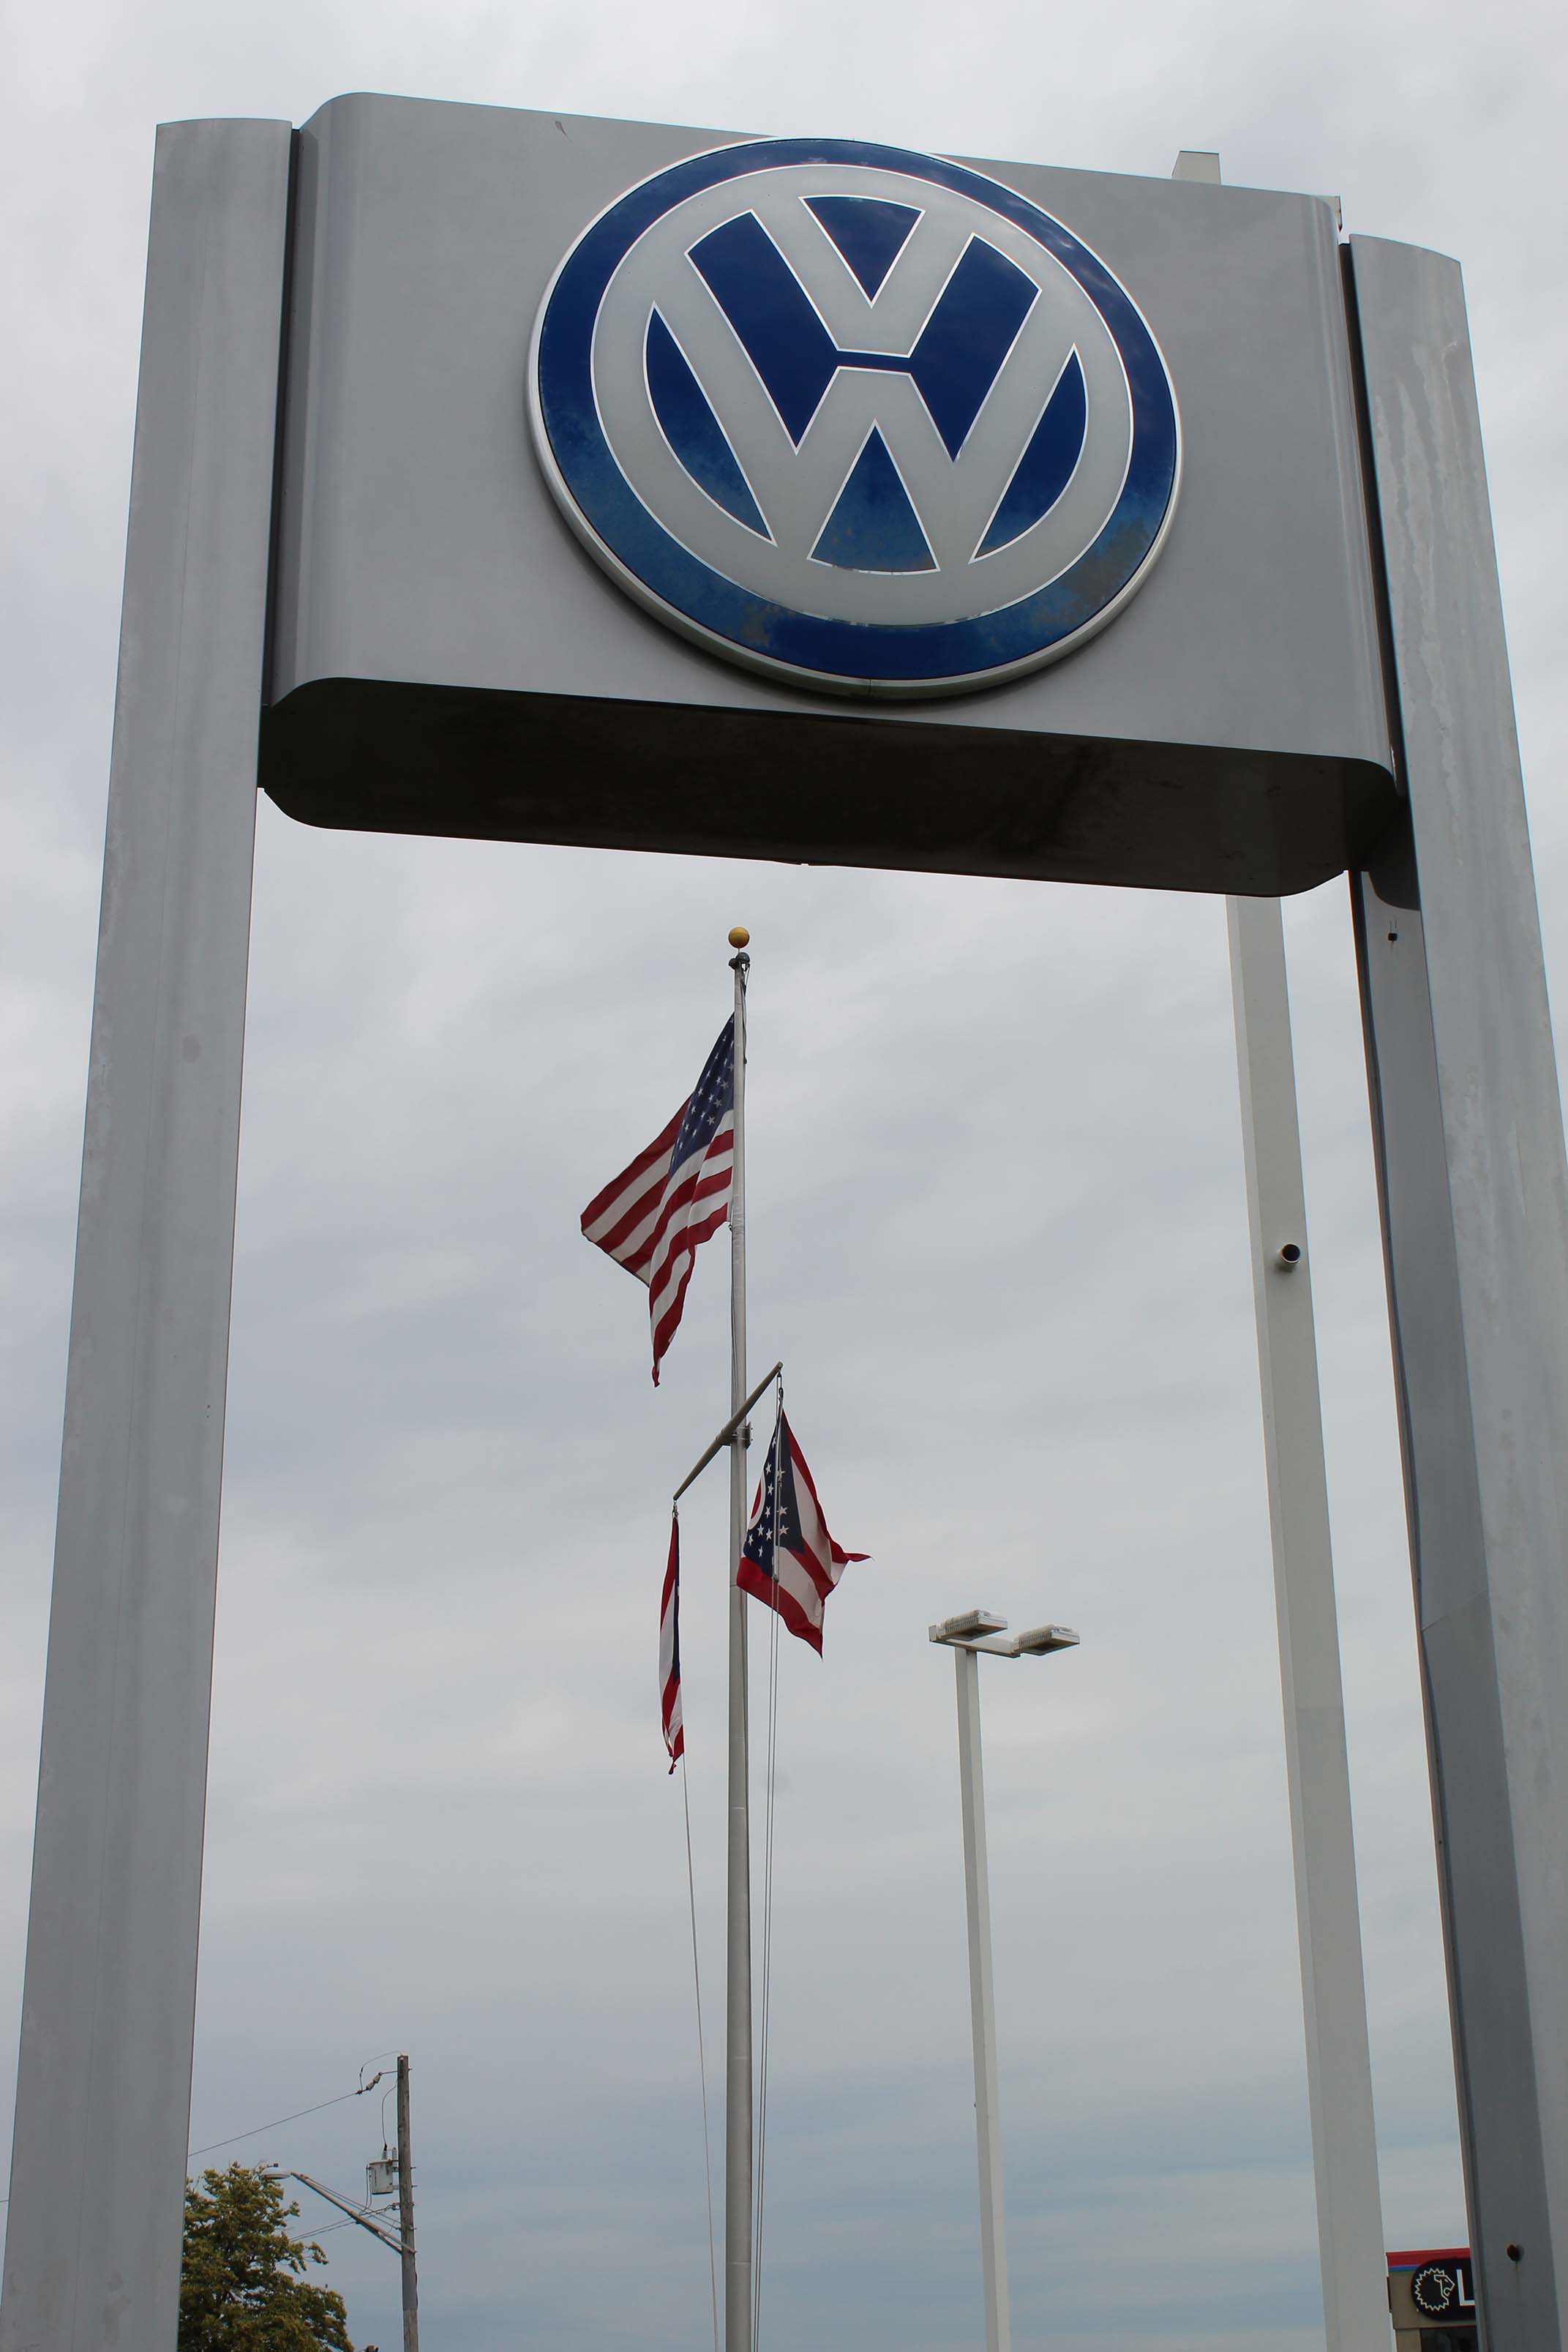 Military and First Responder discounts on Evans Volkswagen